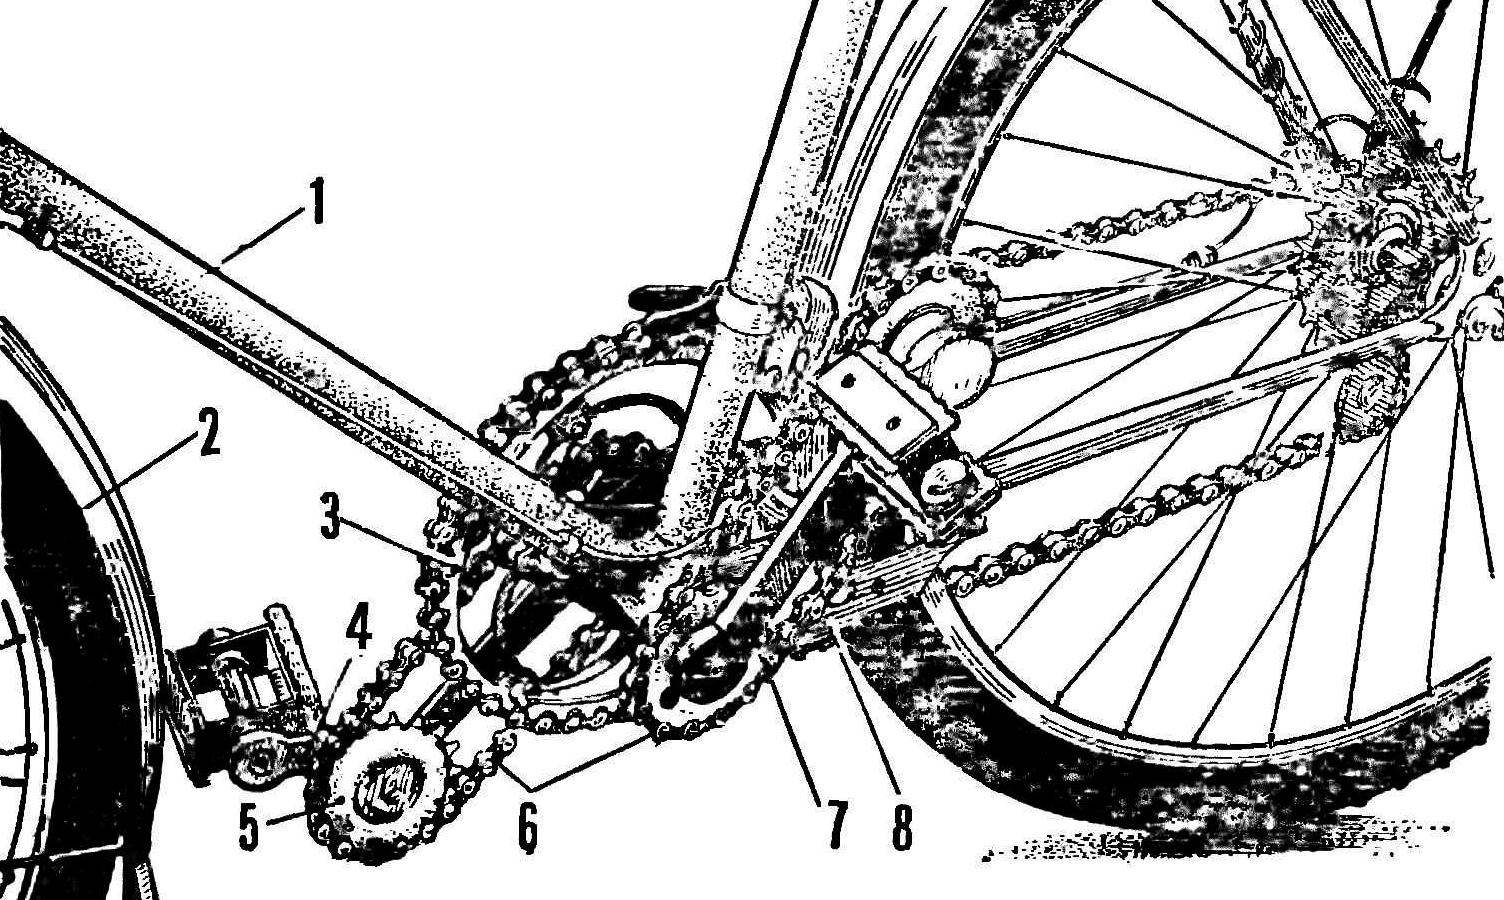 Fig. 1. Here is a new pedal mechanism